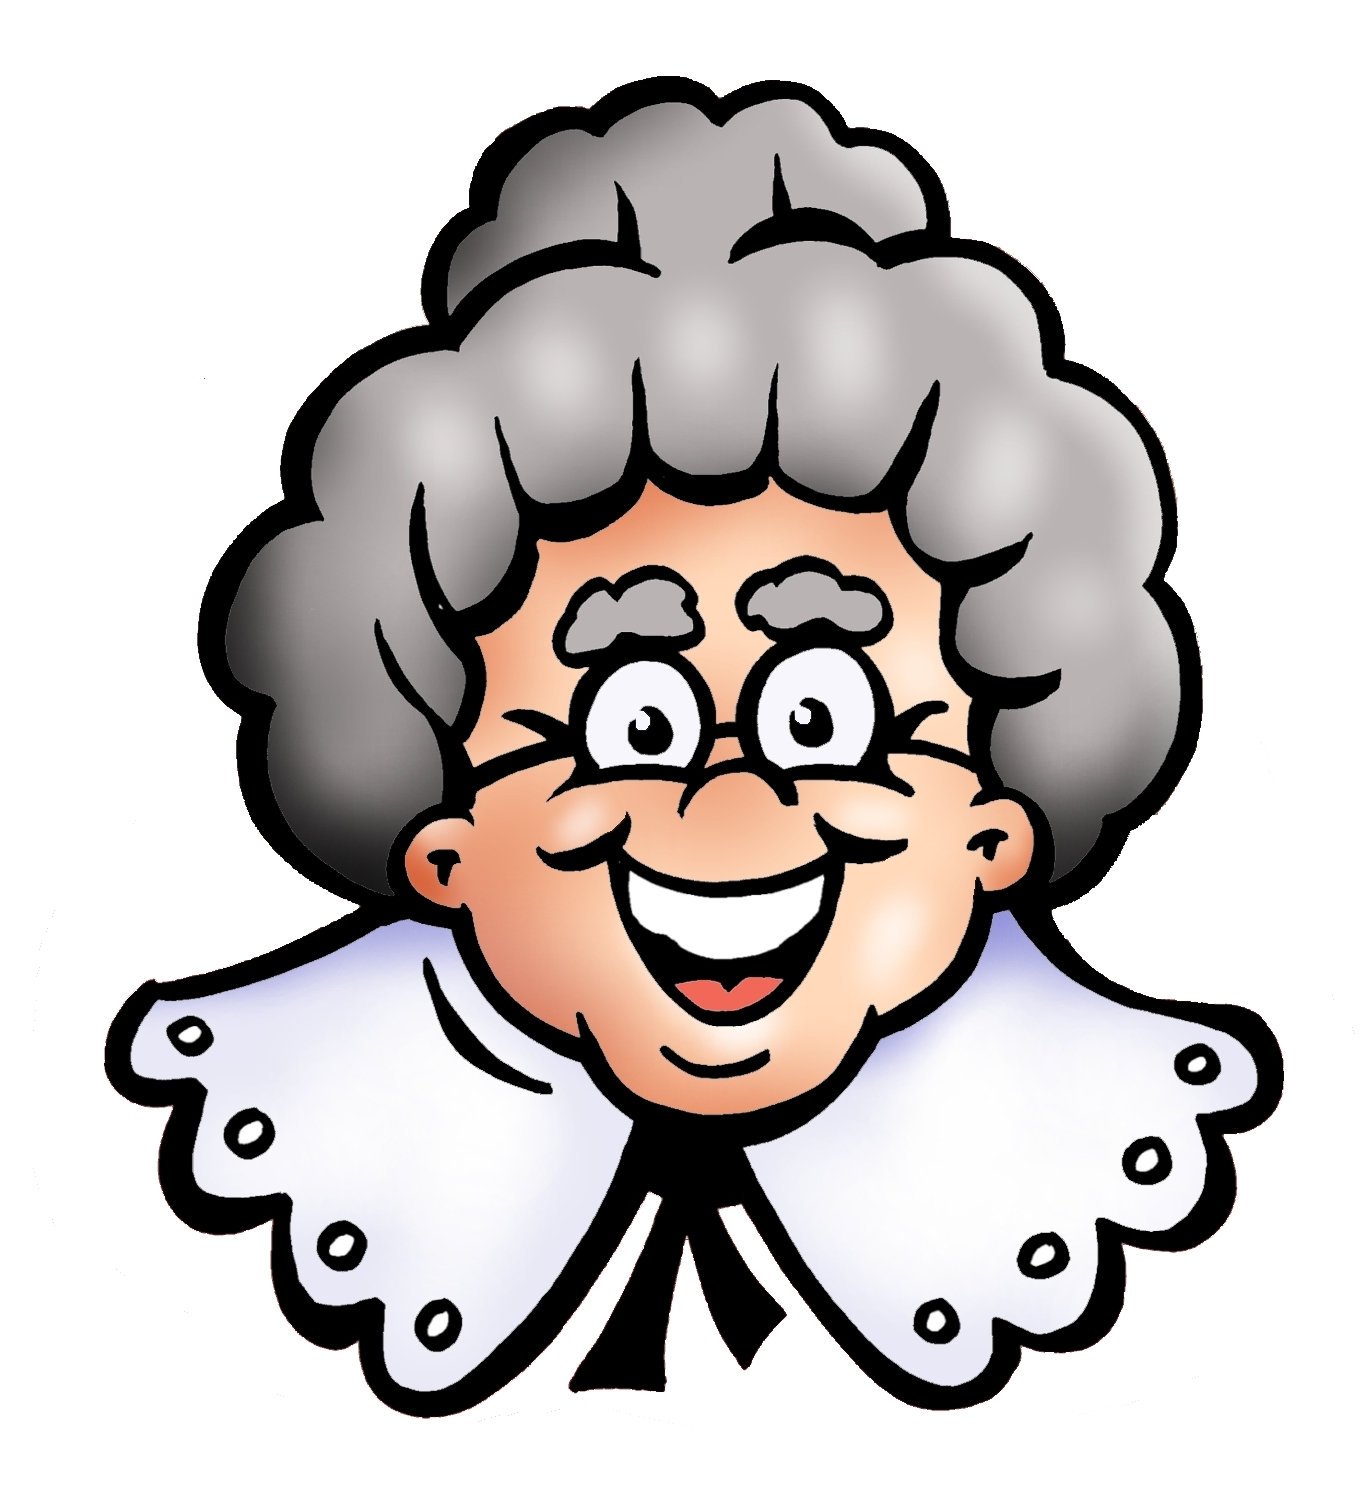 Old Woman Vector - ClipArt Best